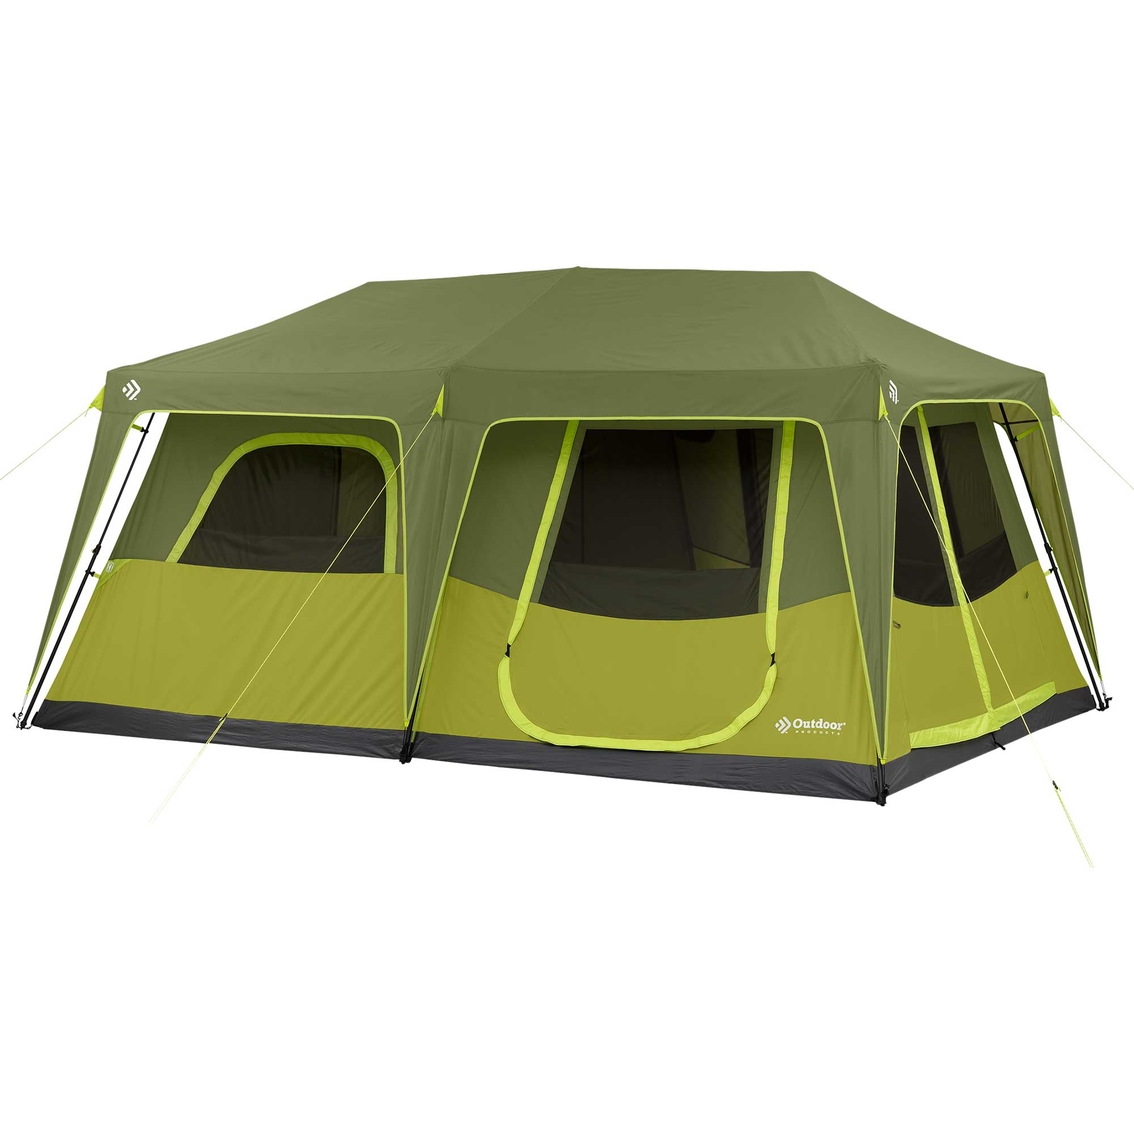 Outdoor Products 10P Instant Tent with Extended Eaves - Image 1 of 10